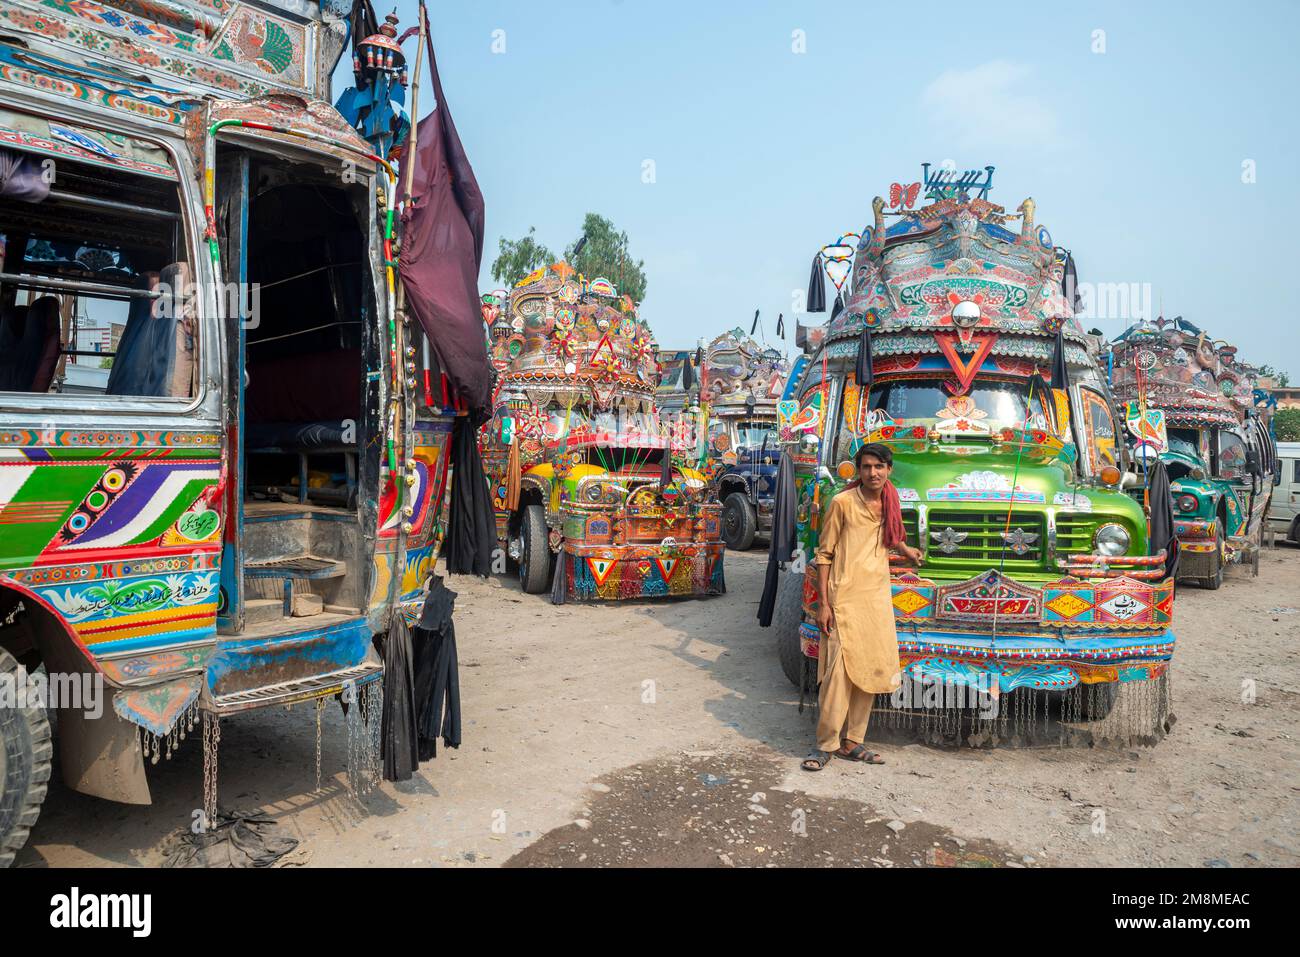 Bus driver in front of his colorfully painted bus, Peshawar, Pakistan Stock Photo